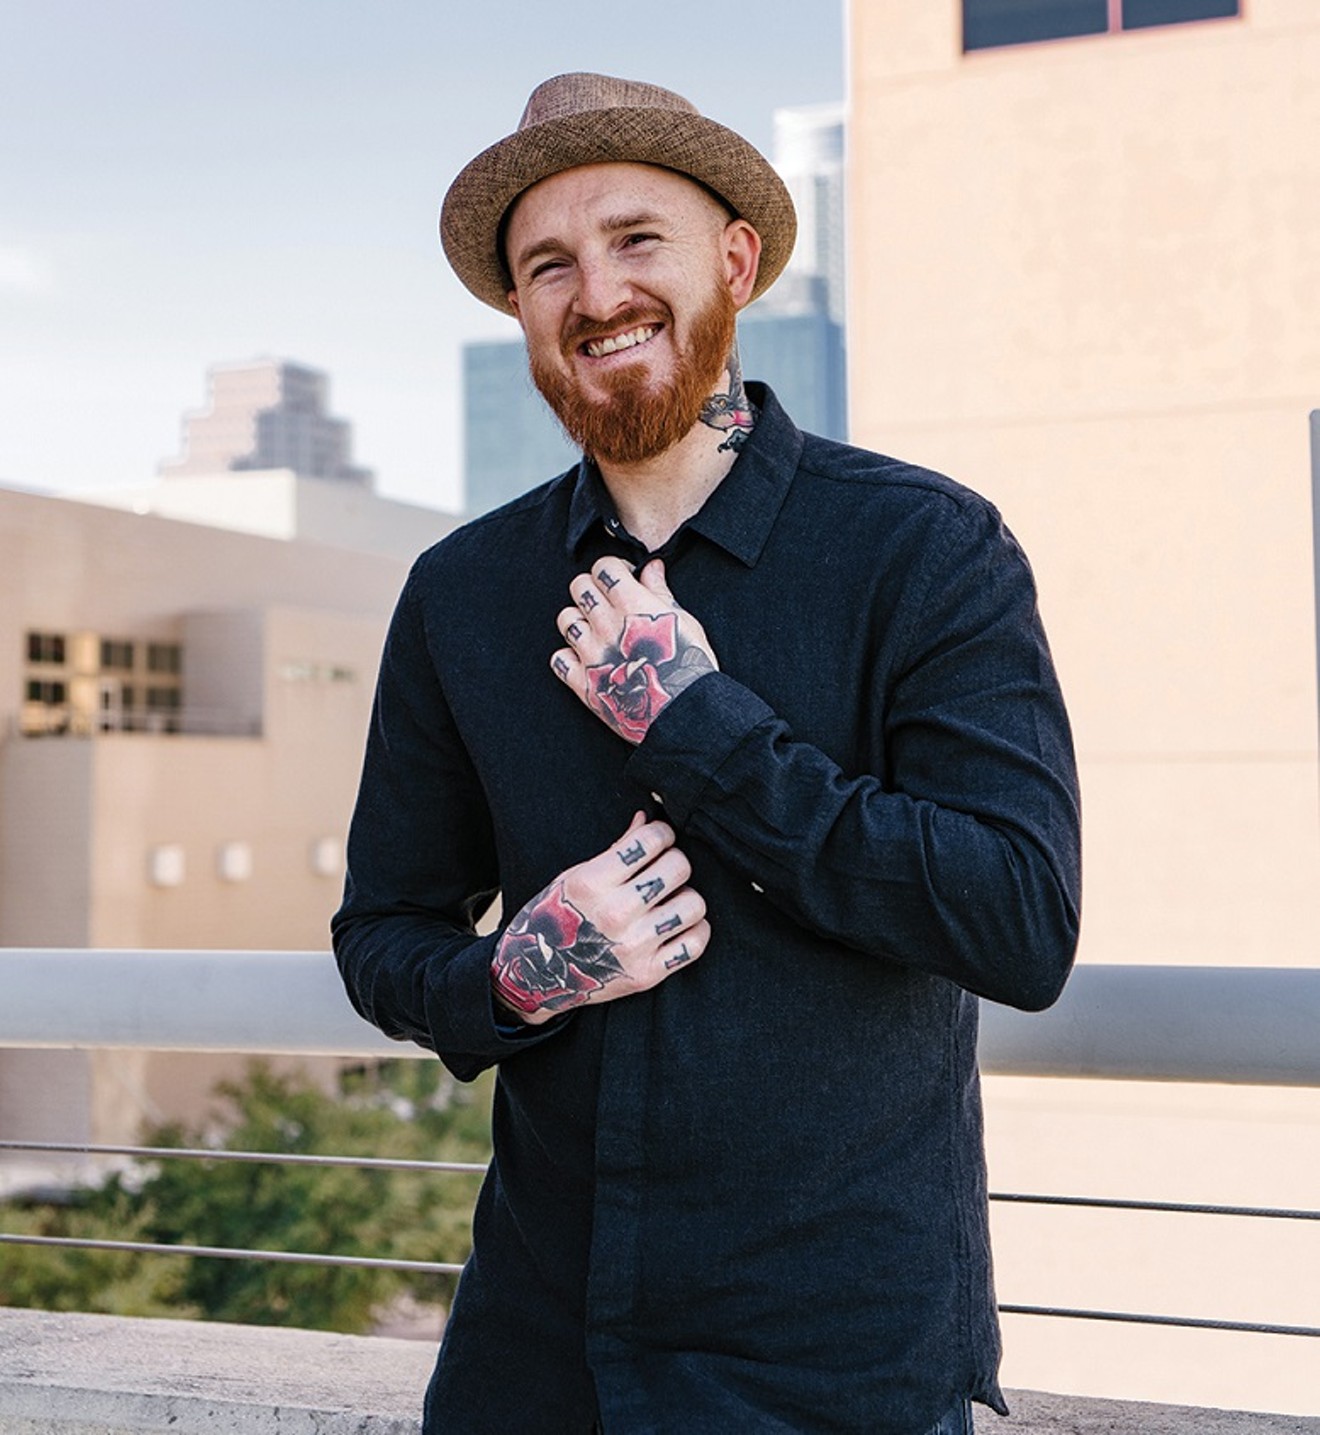 Jason Call faces resistance to opening a tattoo studio in the Design District.